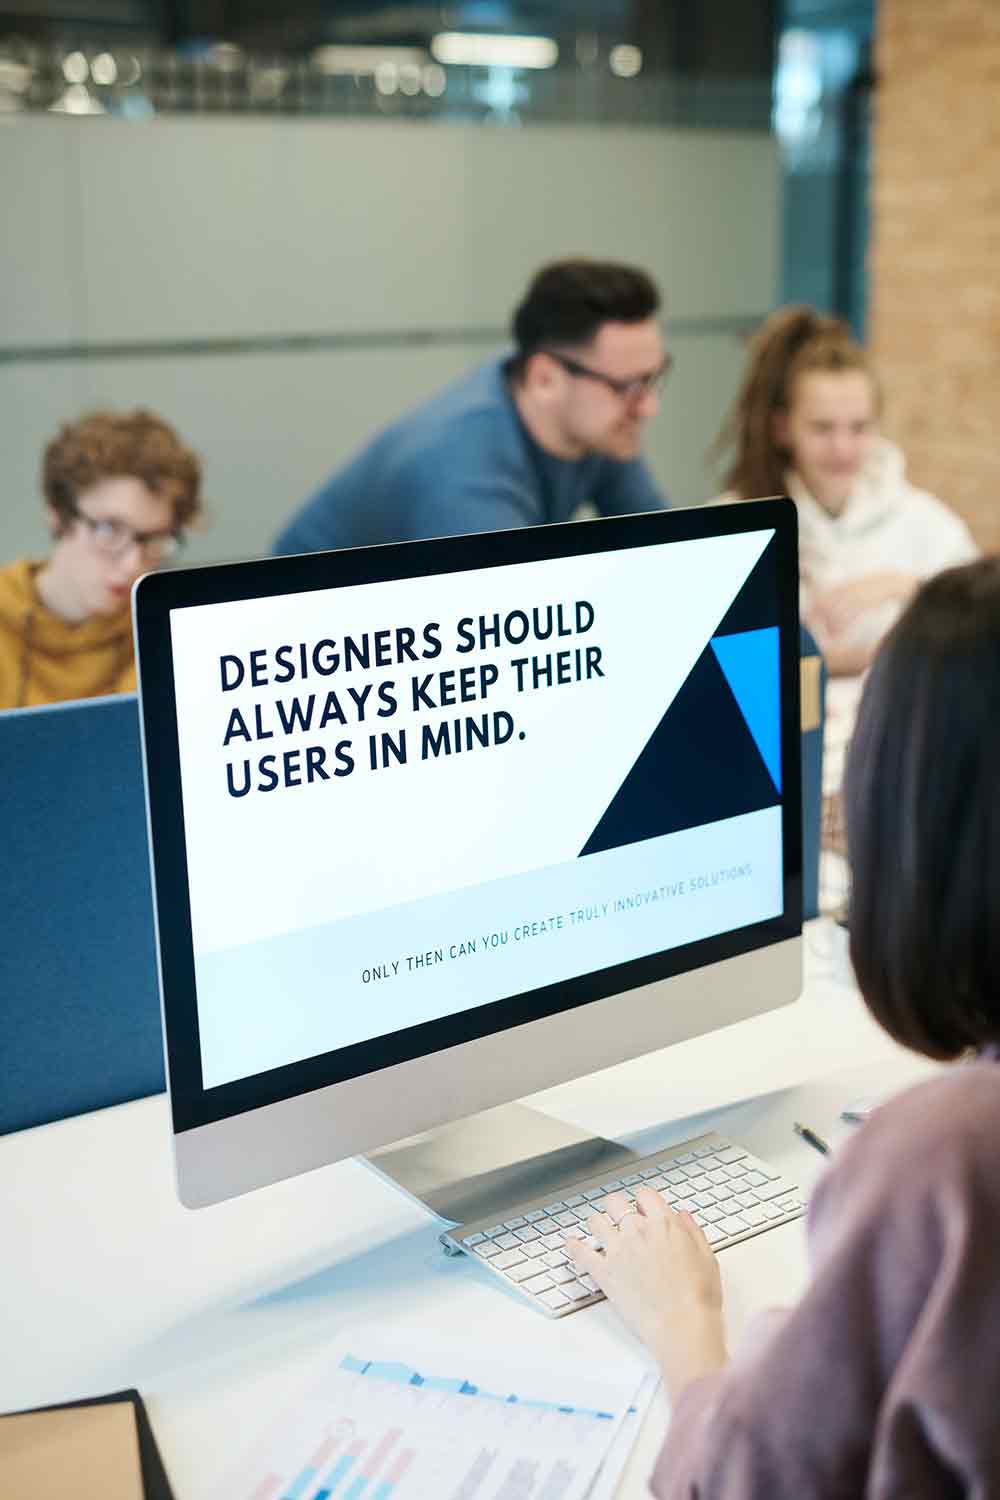 A monitor displaying the text "designers should always keep their users in mind."